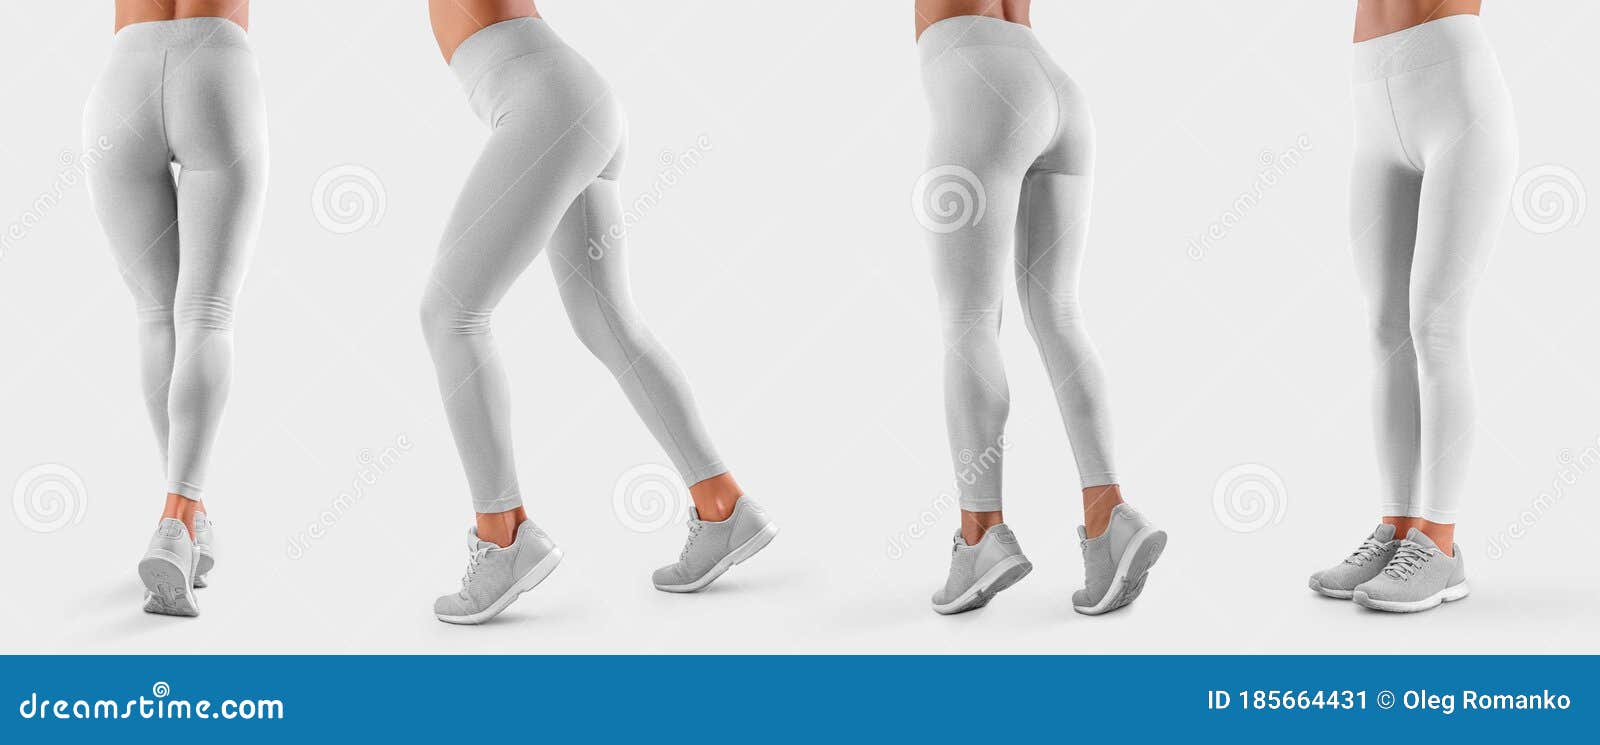 Download Mockup Of Women`s White Leggings On A Fit Girl, Sweatpants ...